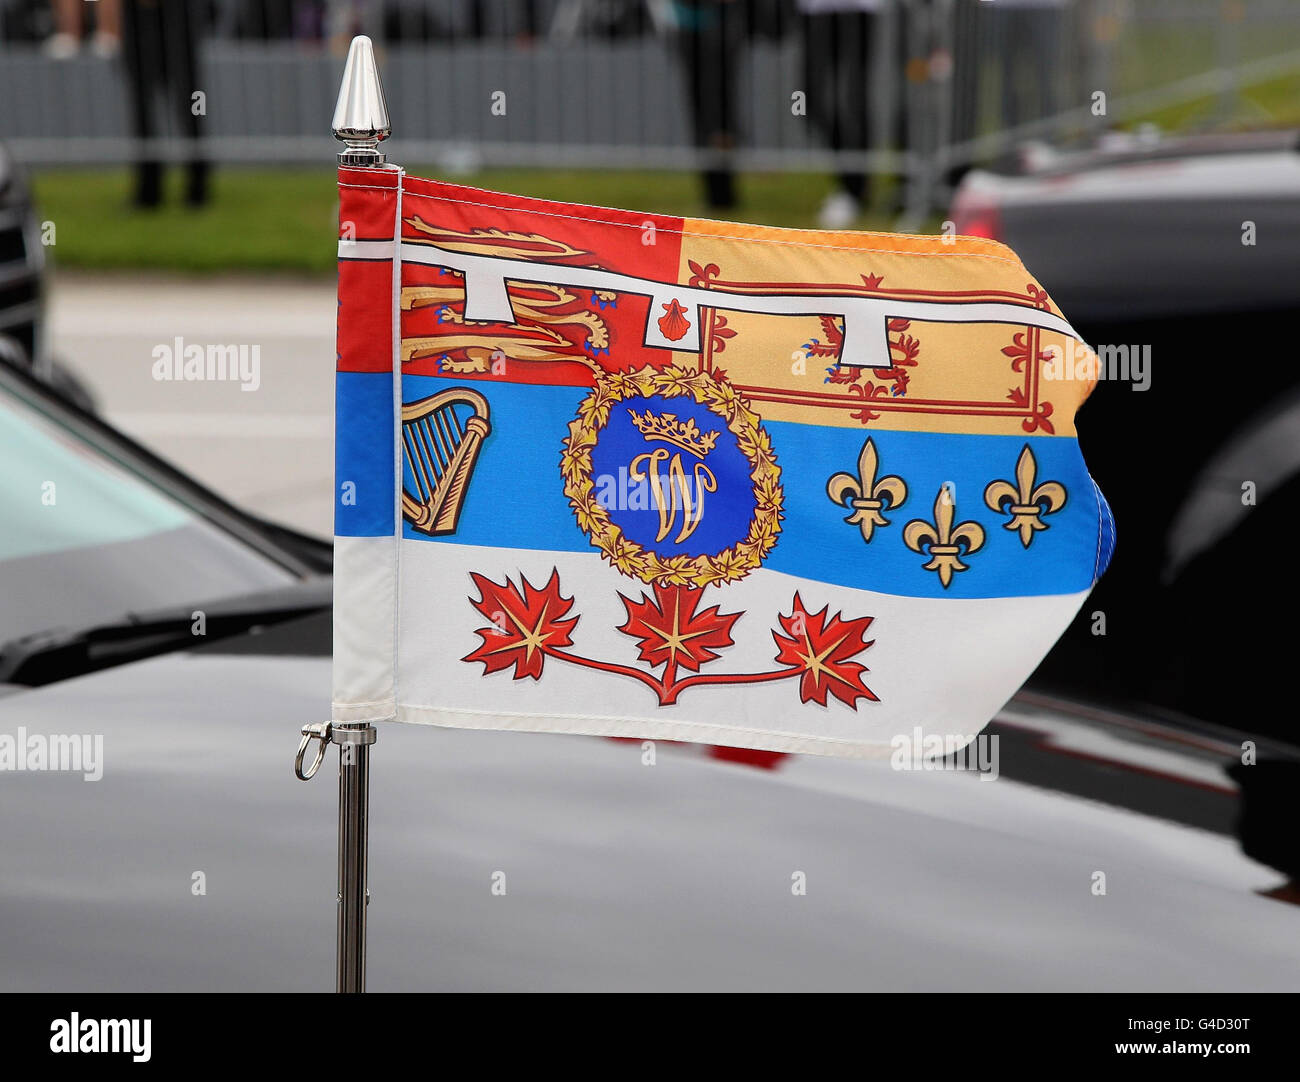 The Duke and Duchess of Cambridge flag flys on the front of his car in the convoy as he arrives at Ottawa Macdonald-Cartier International airport for the start of their visit to Canada. Stock Photo